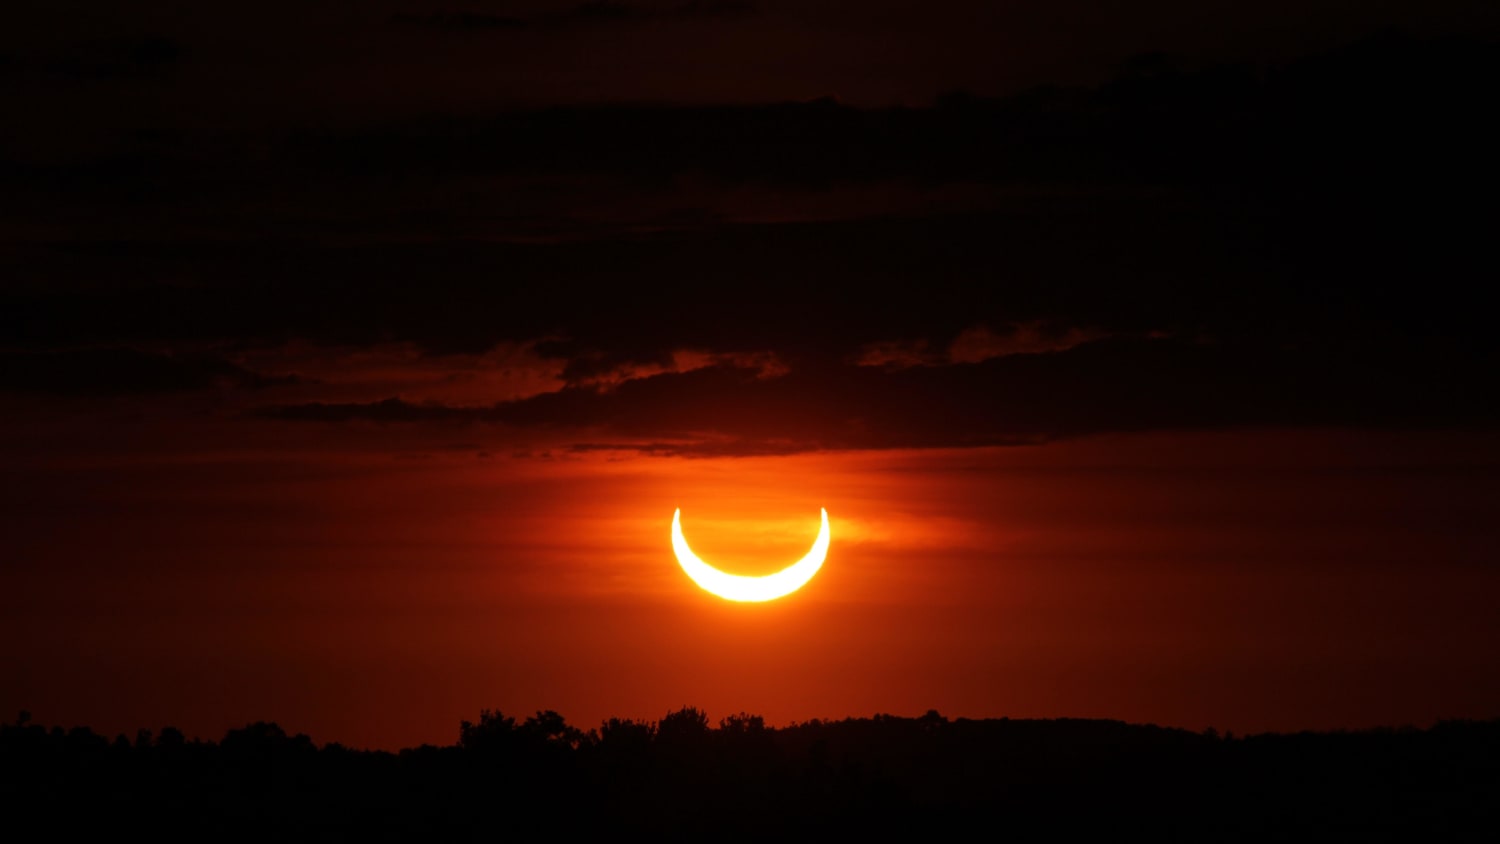 2021 solar eclipse - Probably the coolest photo I've ever taken